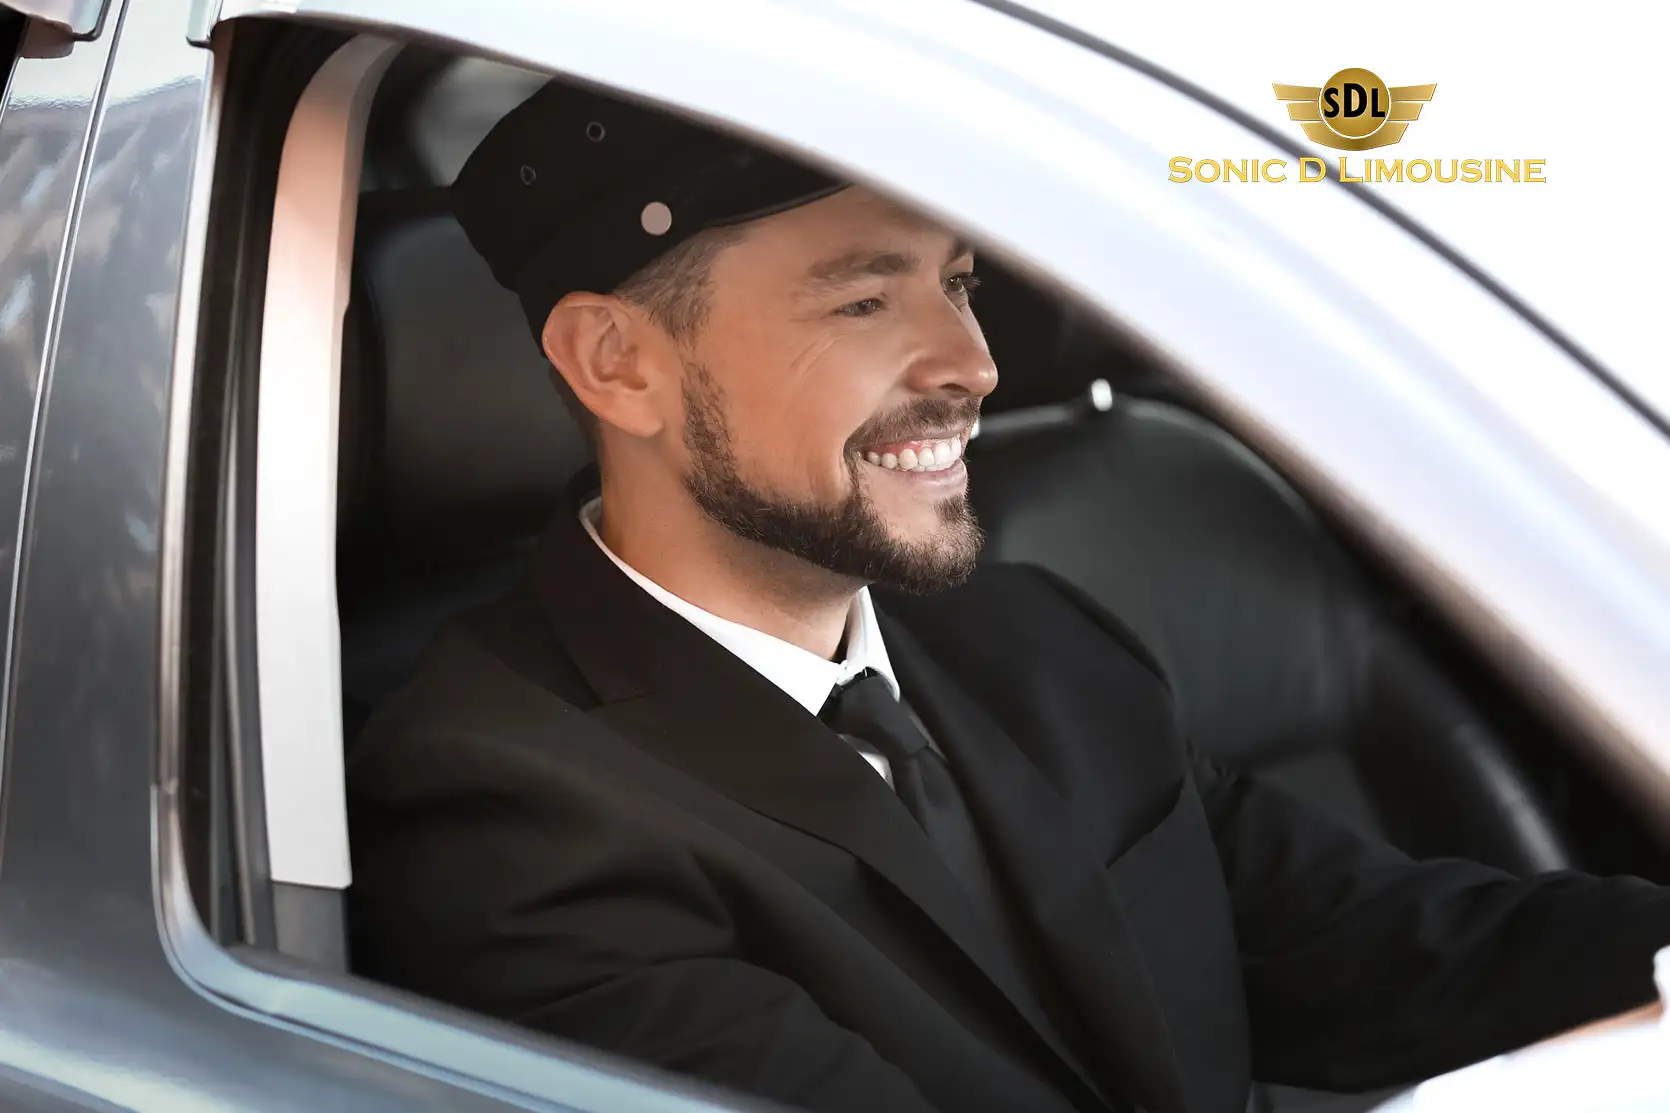 Sonic D Limousine is the premier transportation provider in Experience Seamless Airport Transfers with Blacklane's Chauffeur Service in Berlin